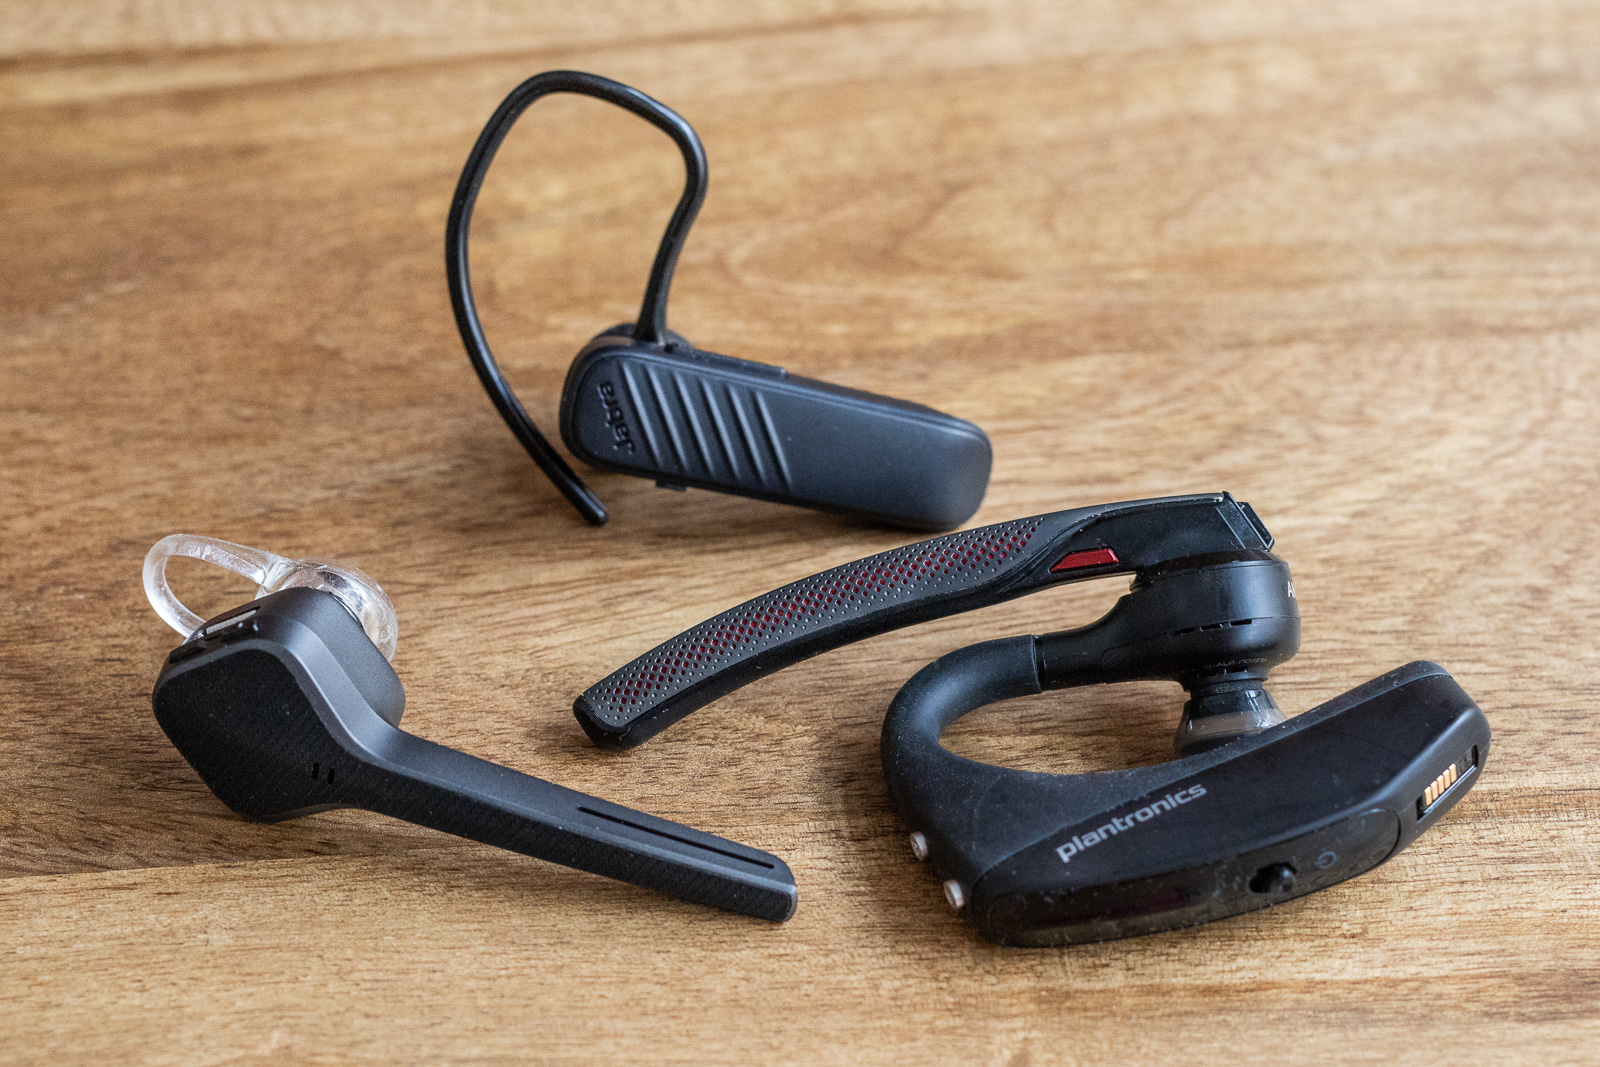 The Bluetooth headset | Engadget